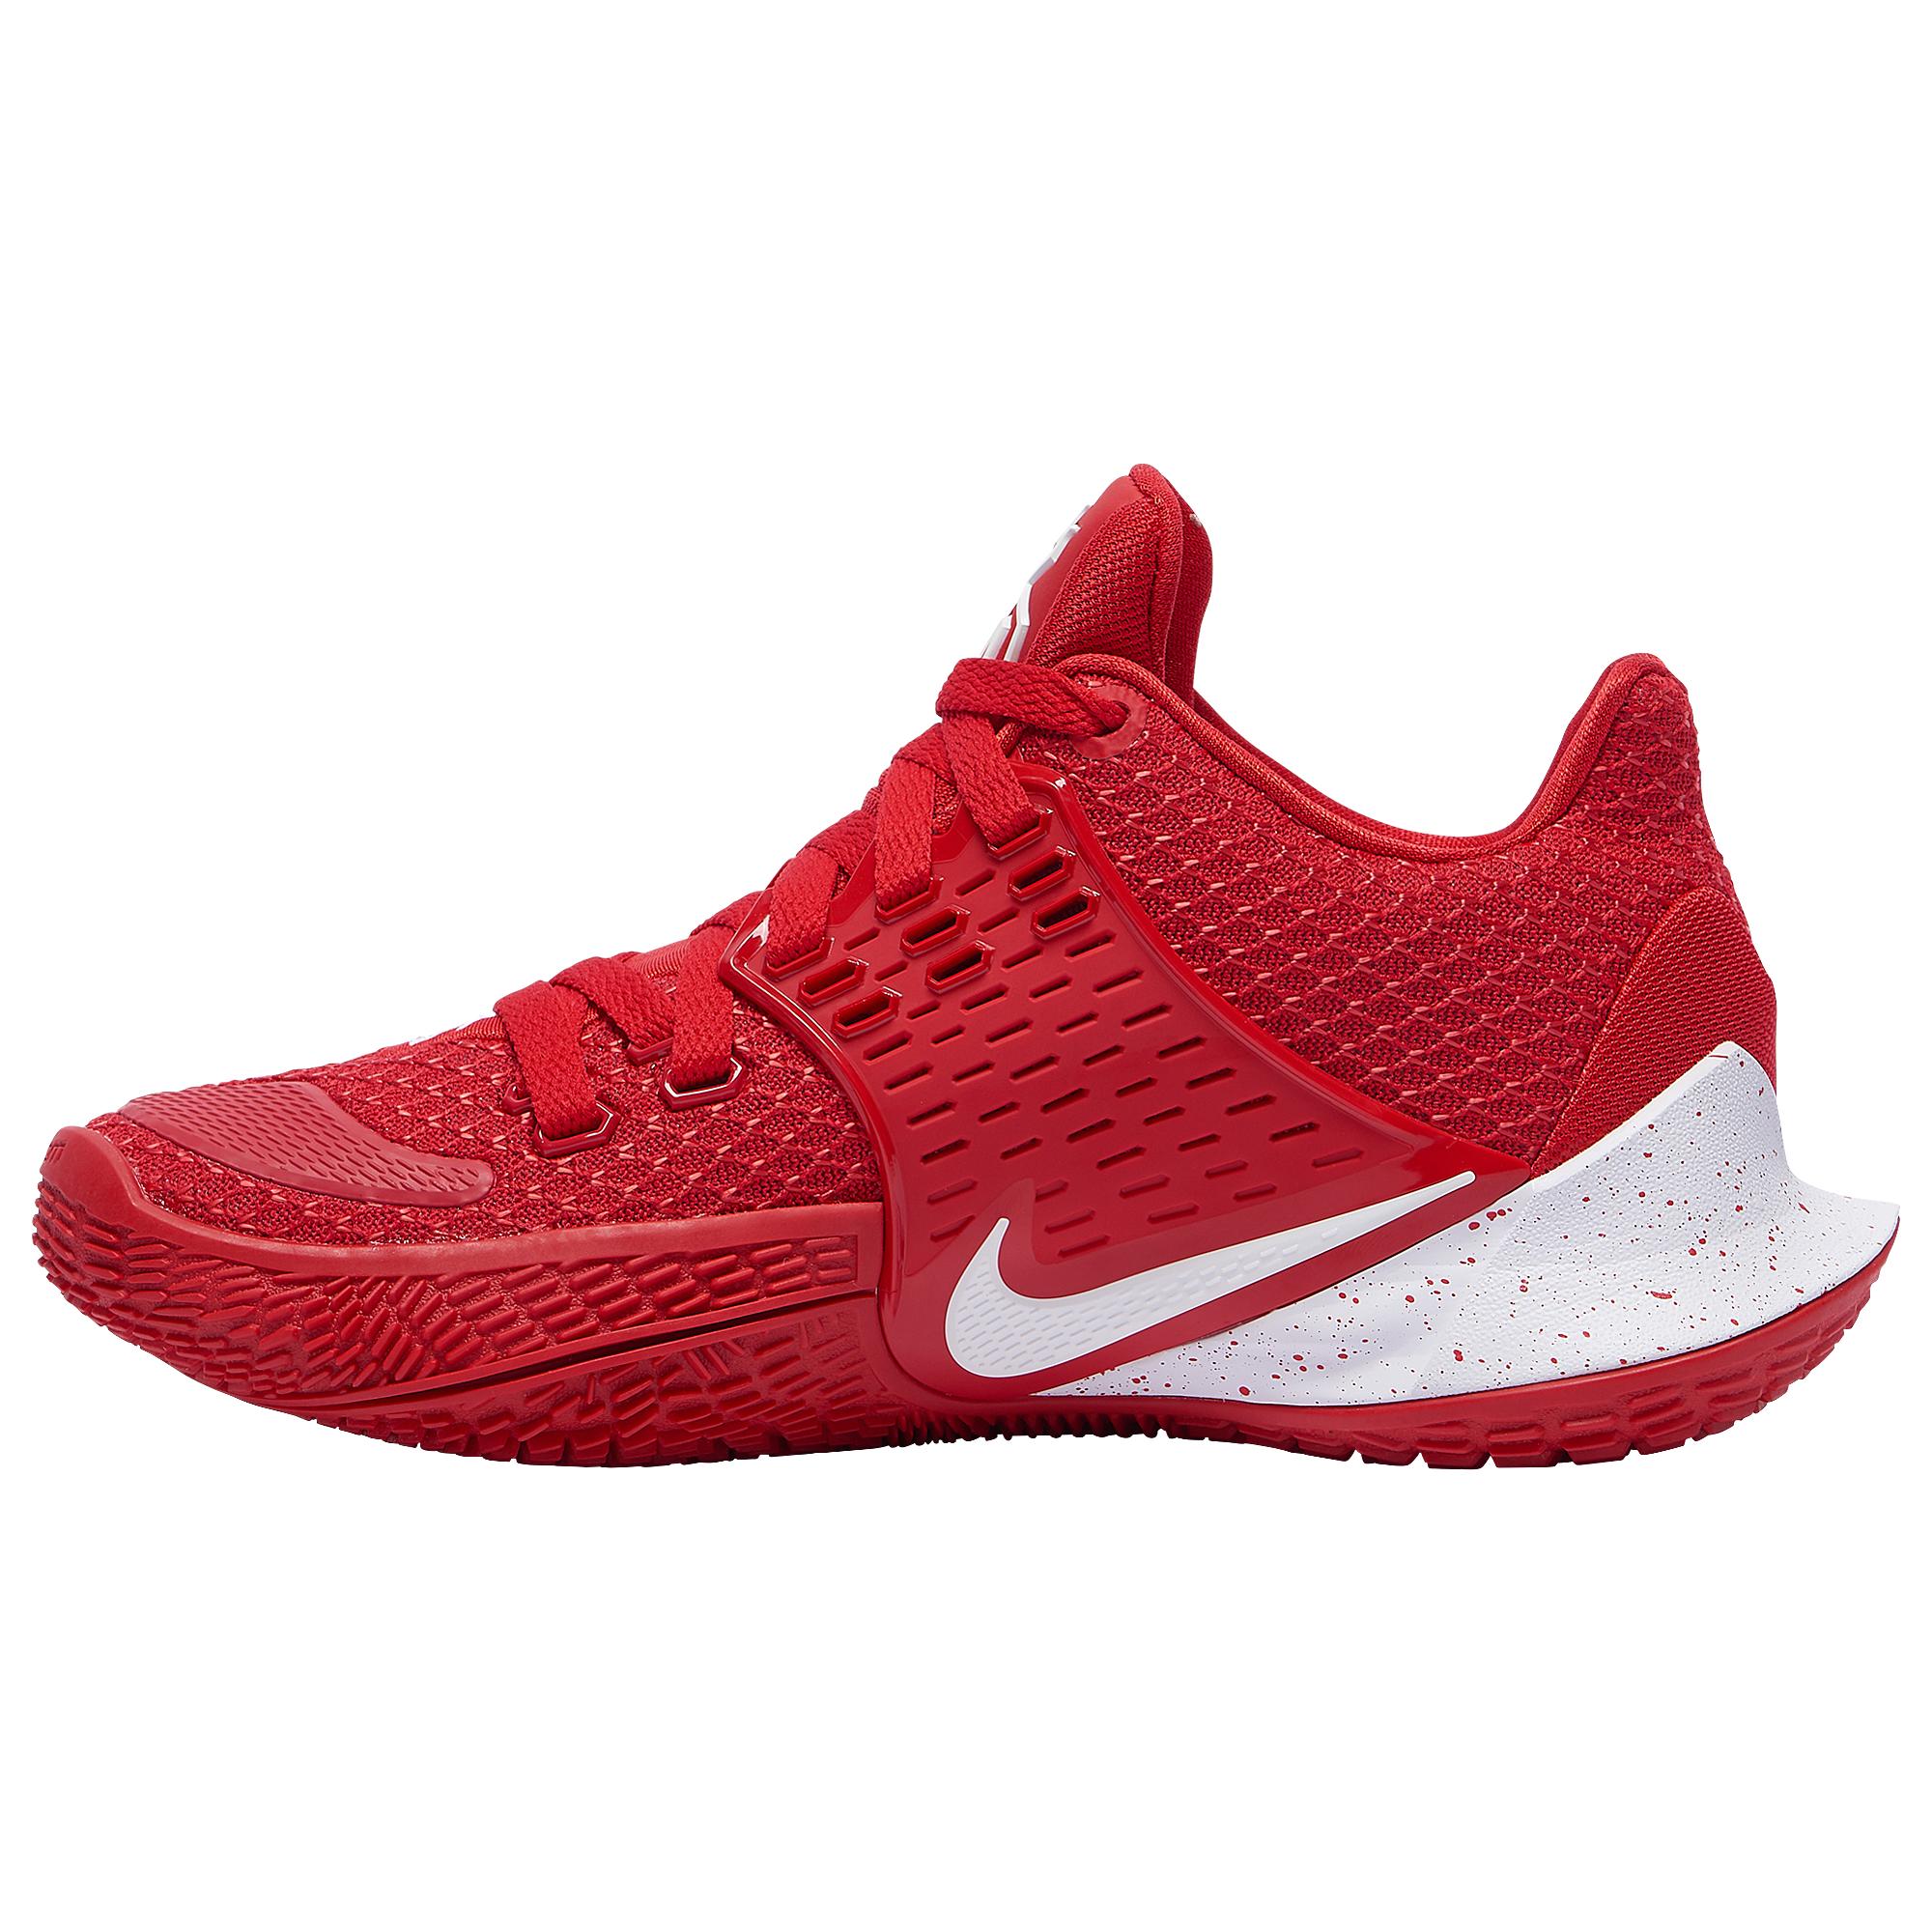 kyrie 2 shoes red and white